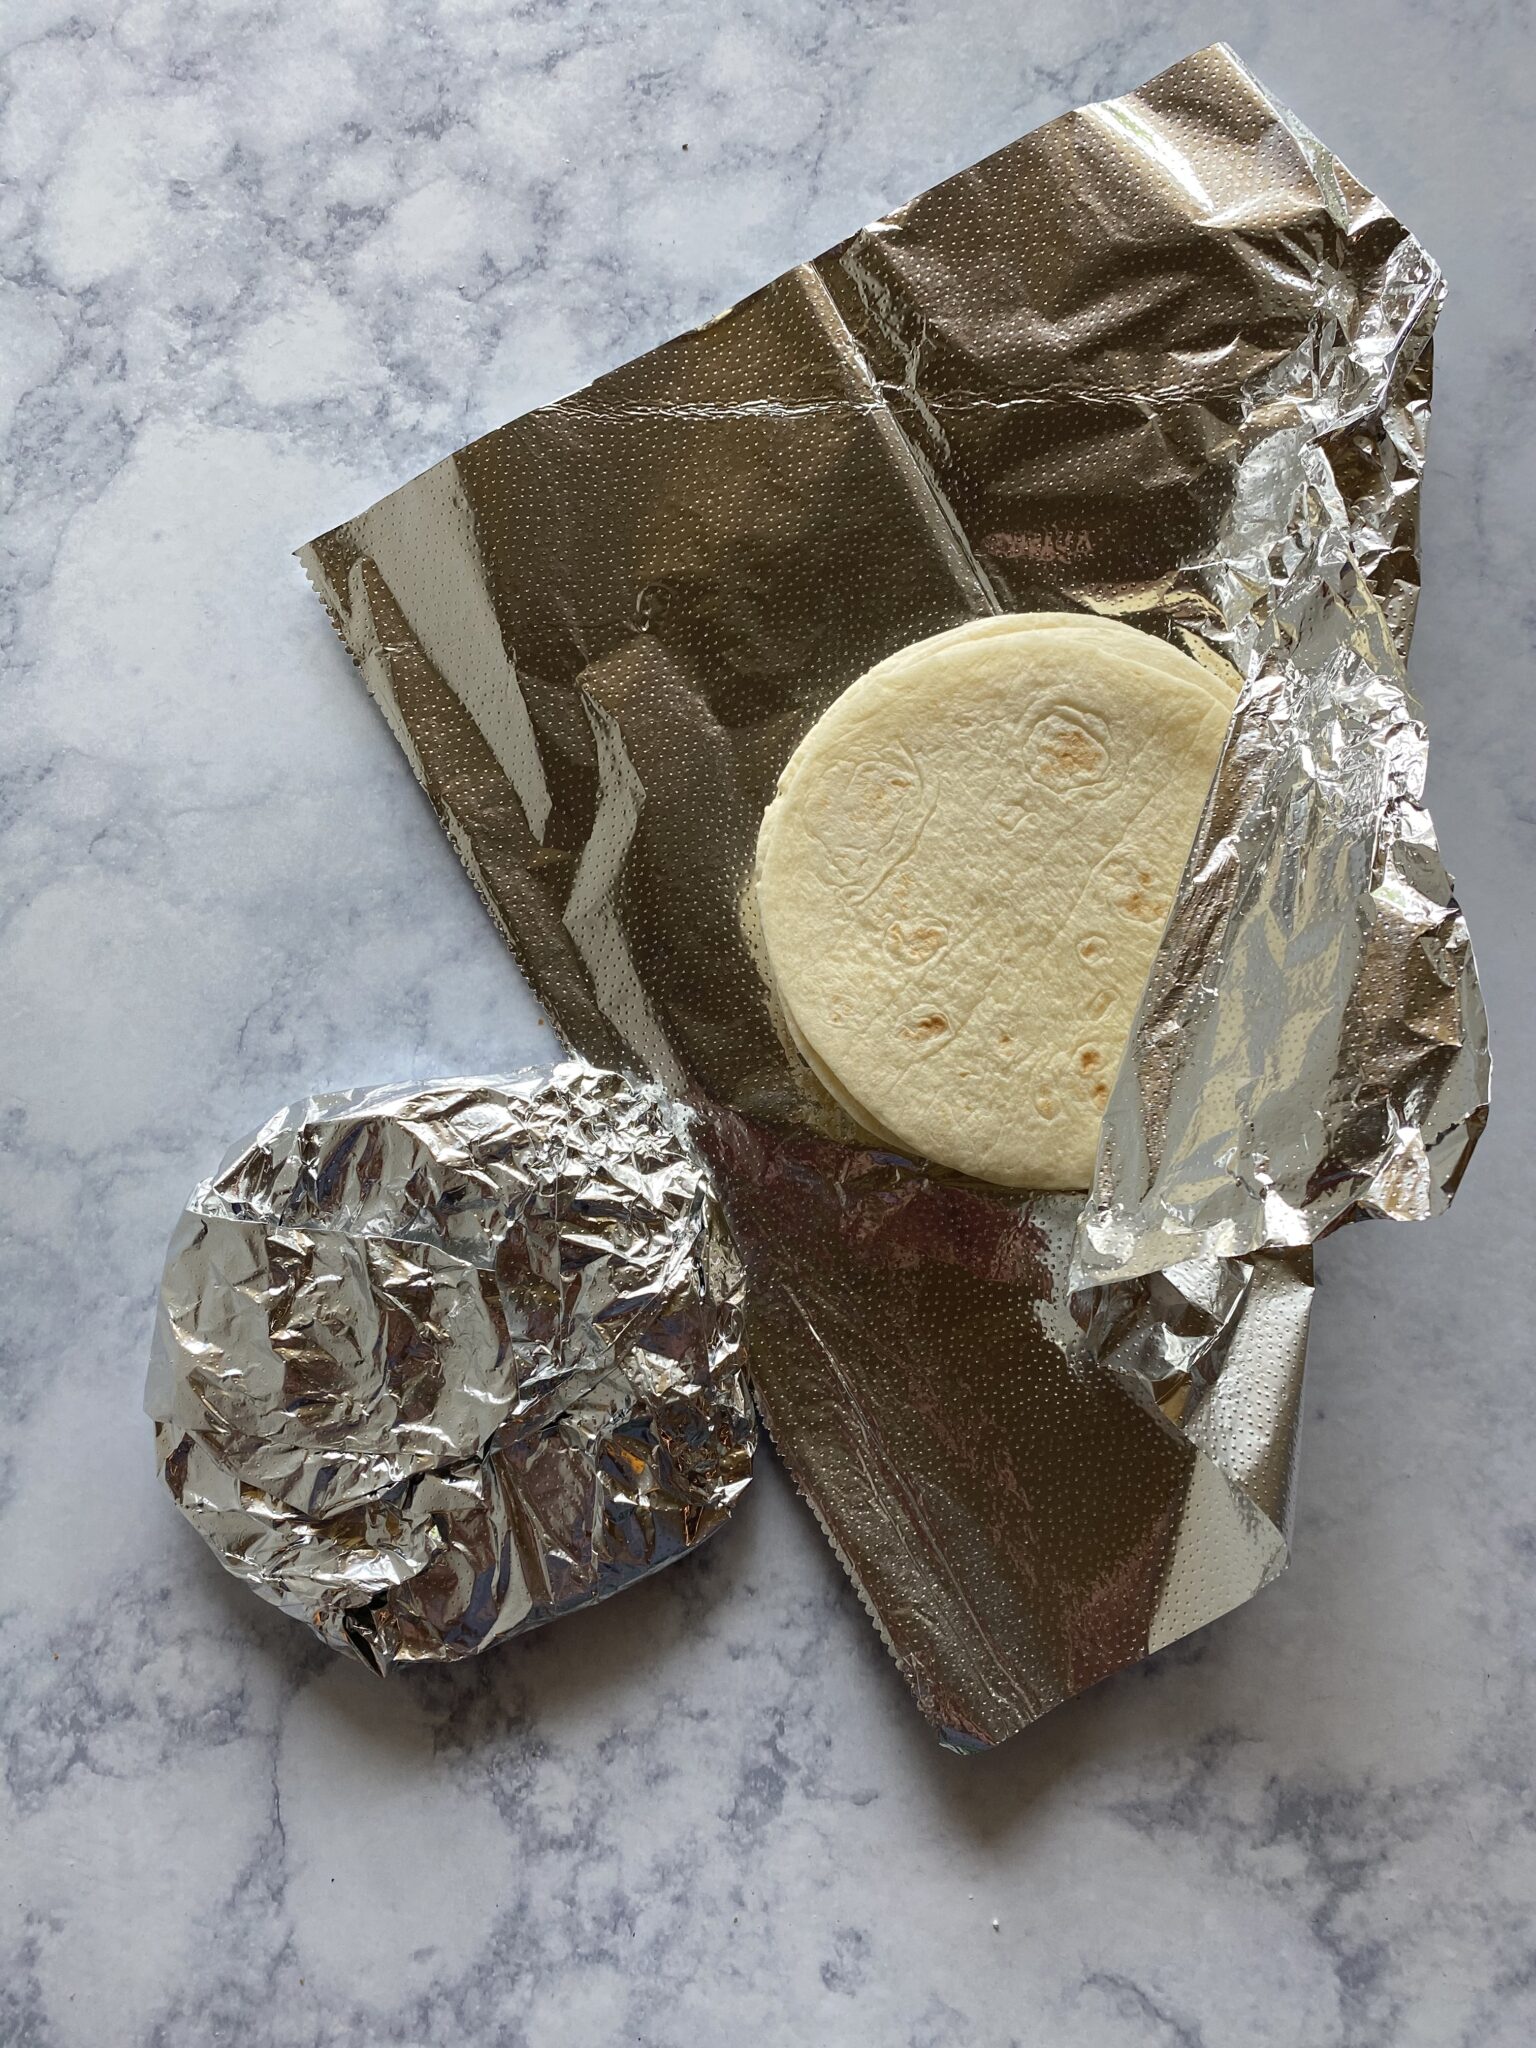 mini flour tortillas in foil, one opened and one closed